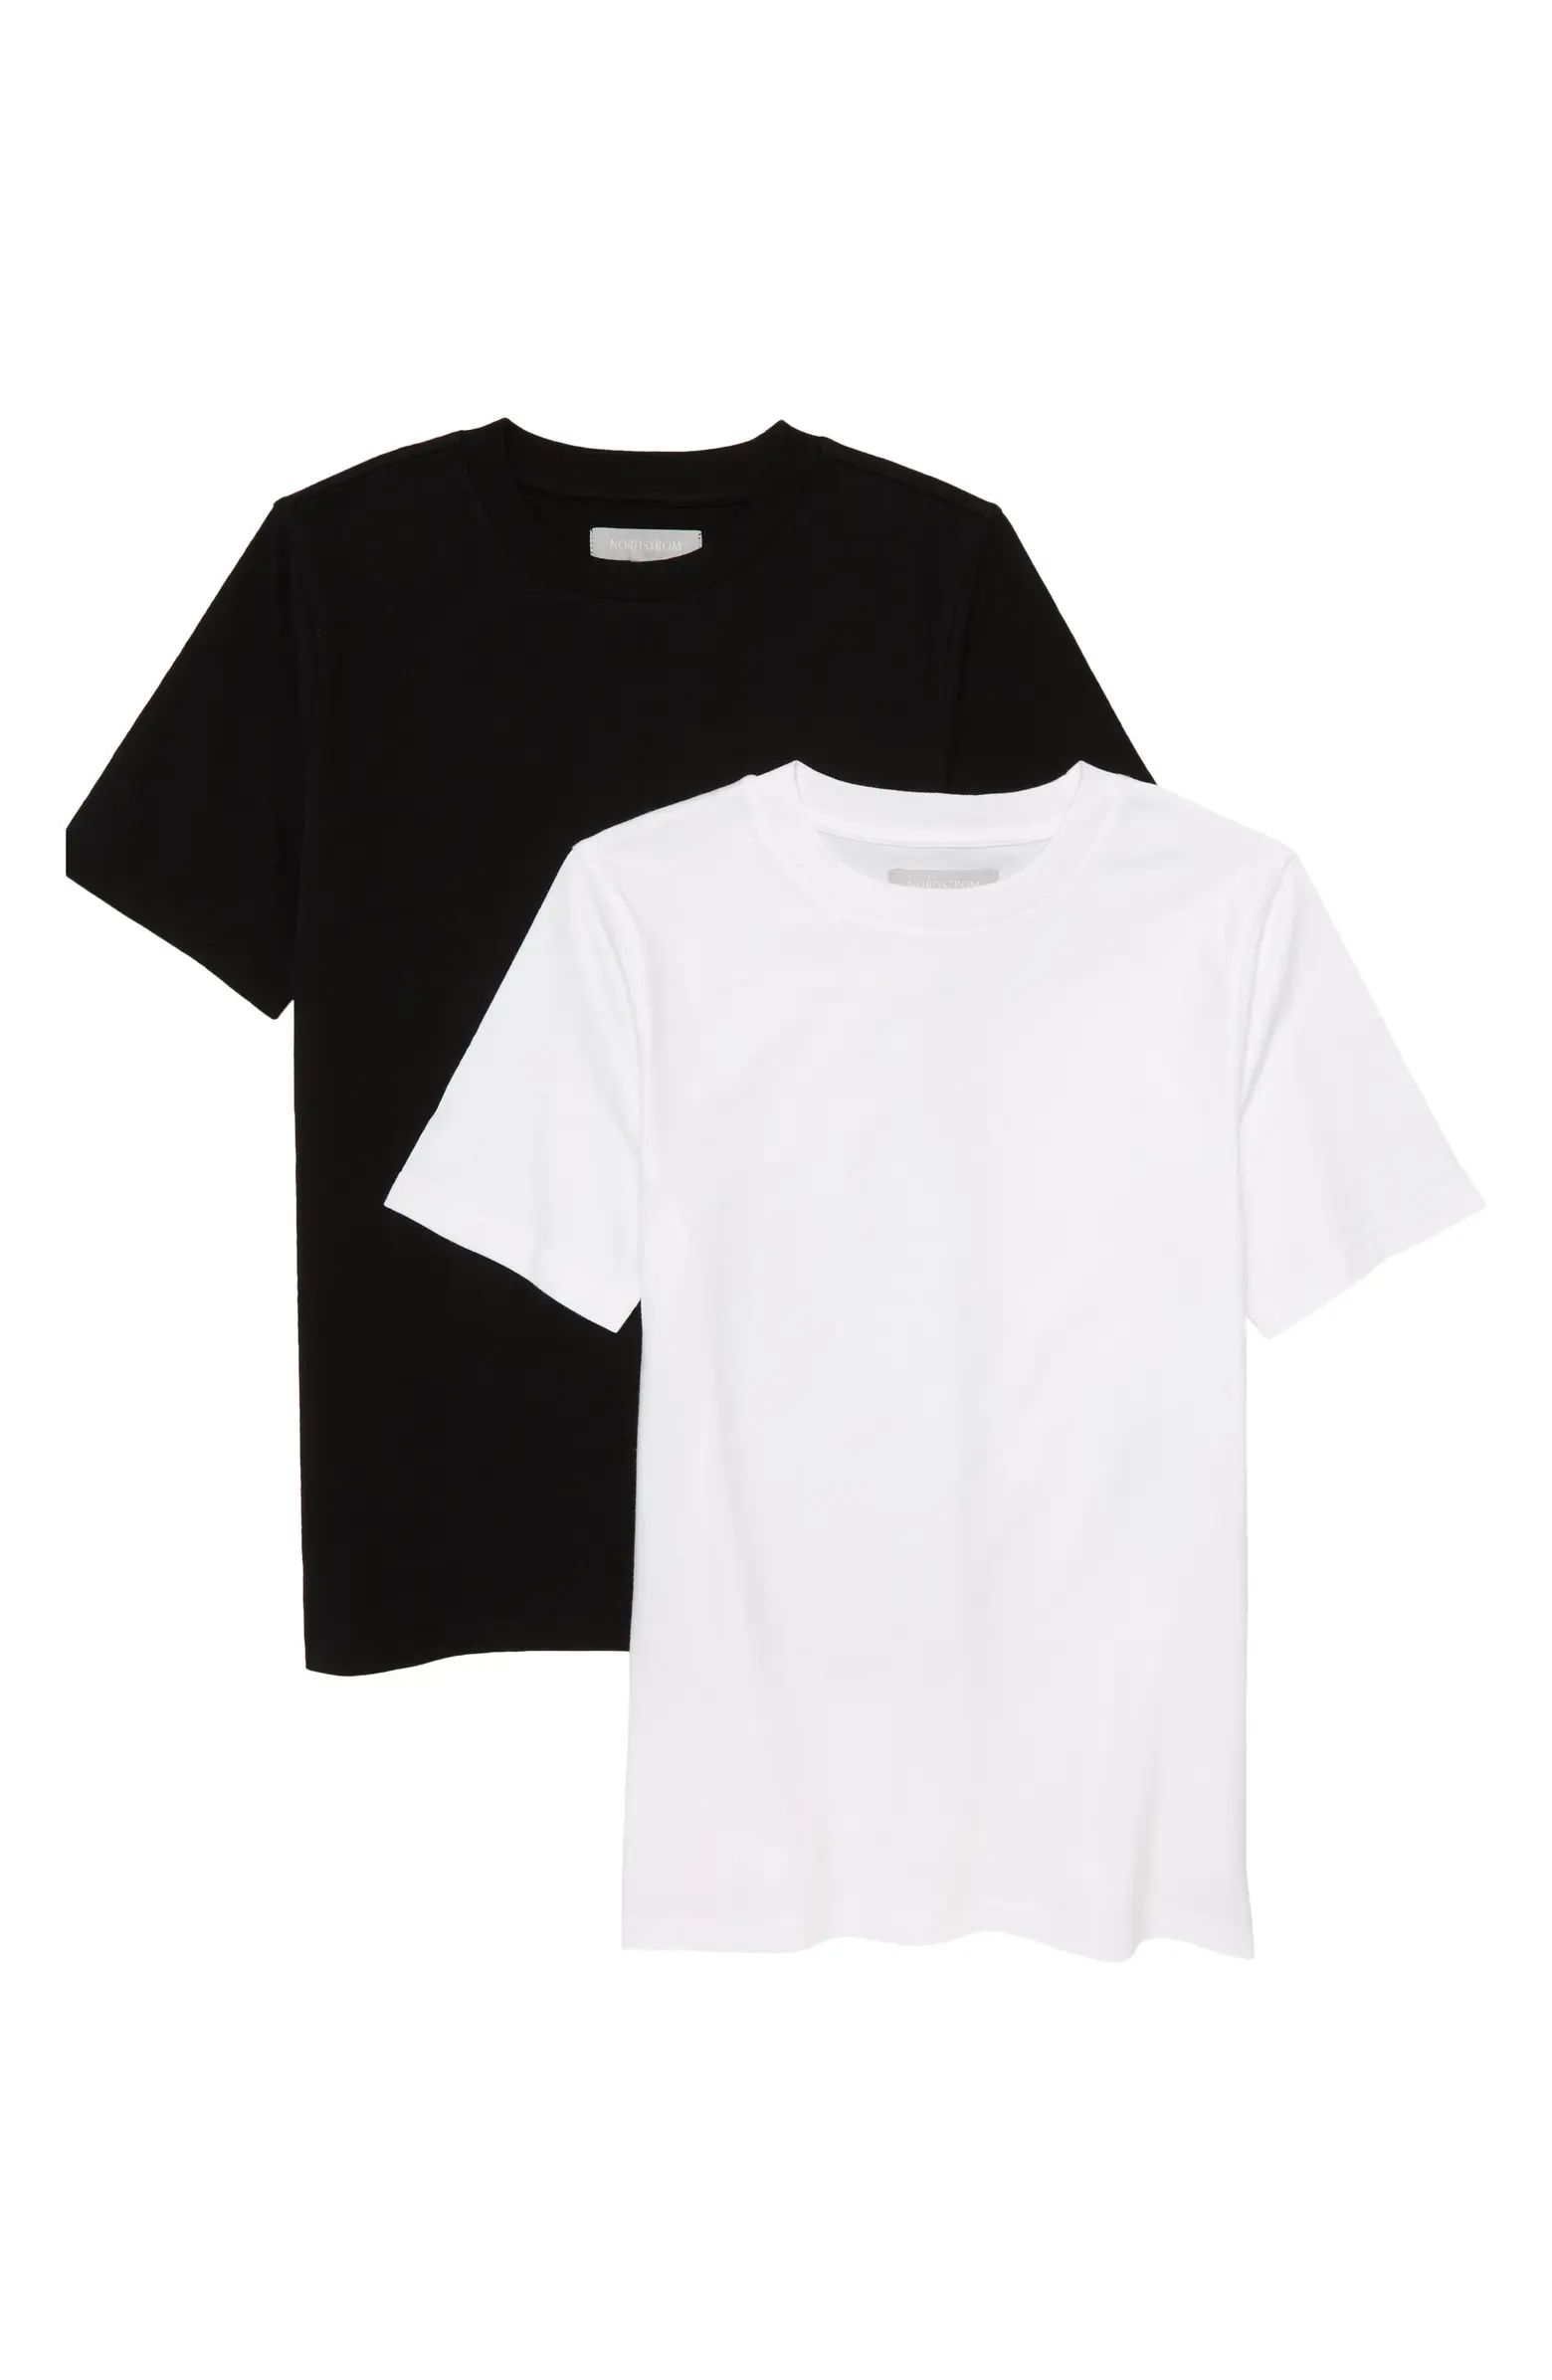 Nordstrom Kids' 2-Pack Core Organic Cotton T-Shirts | Nordstrom | Nordstrom